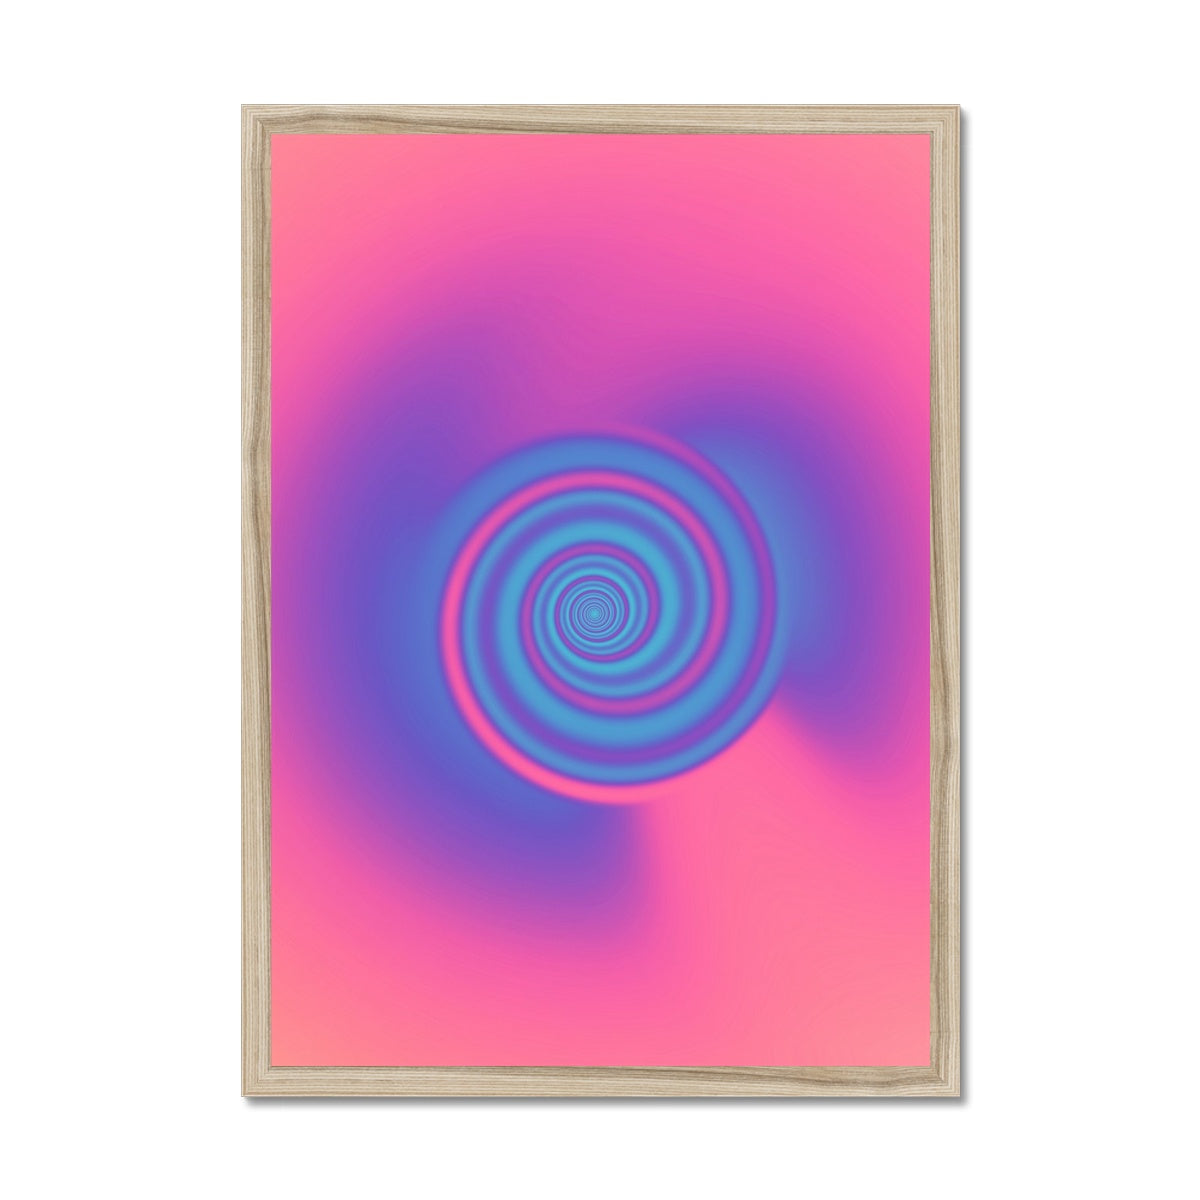 © les muses / Abstract aura wall art prints featuring warped gradients swirled to appear similar to a rabbit hole. Our colorful aura gradient posters are an aesthetic addition to any dorm or apartment decor.